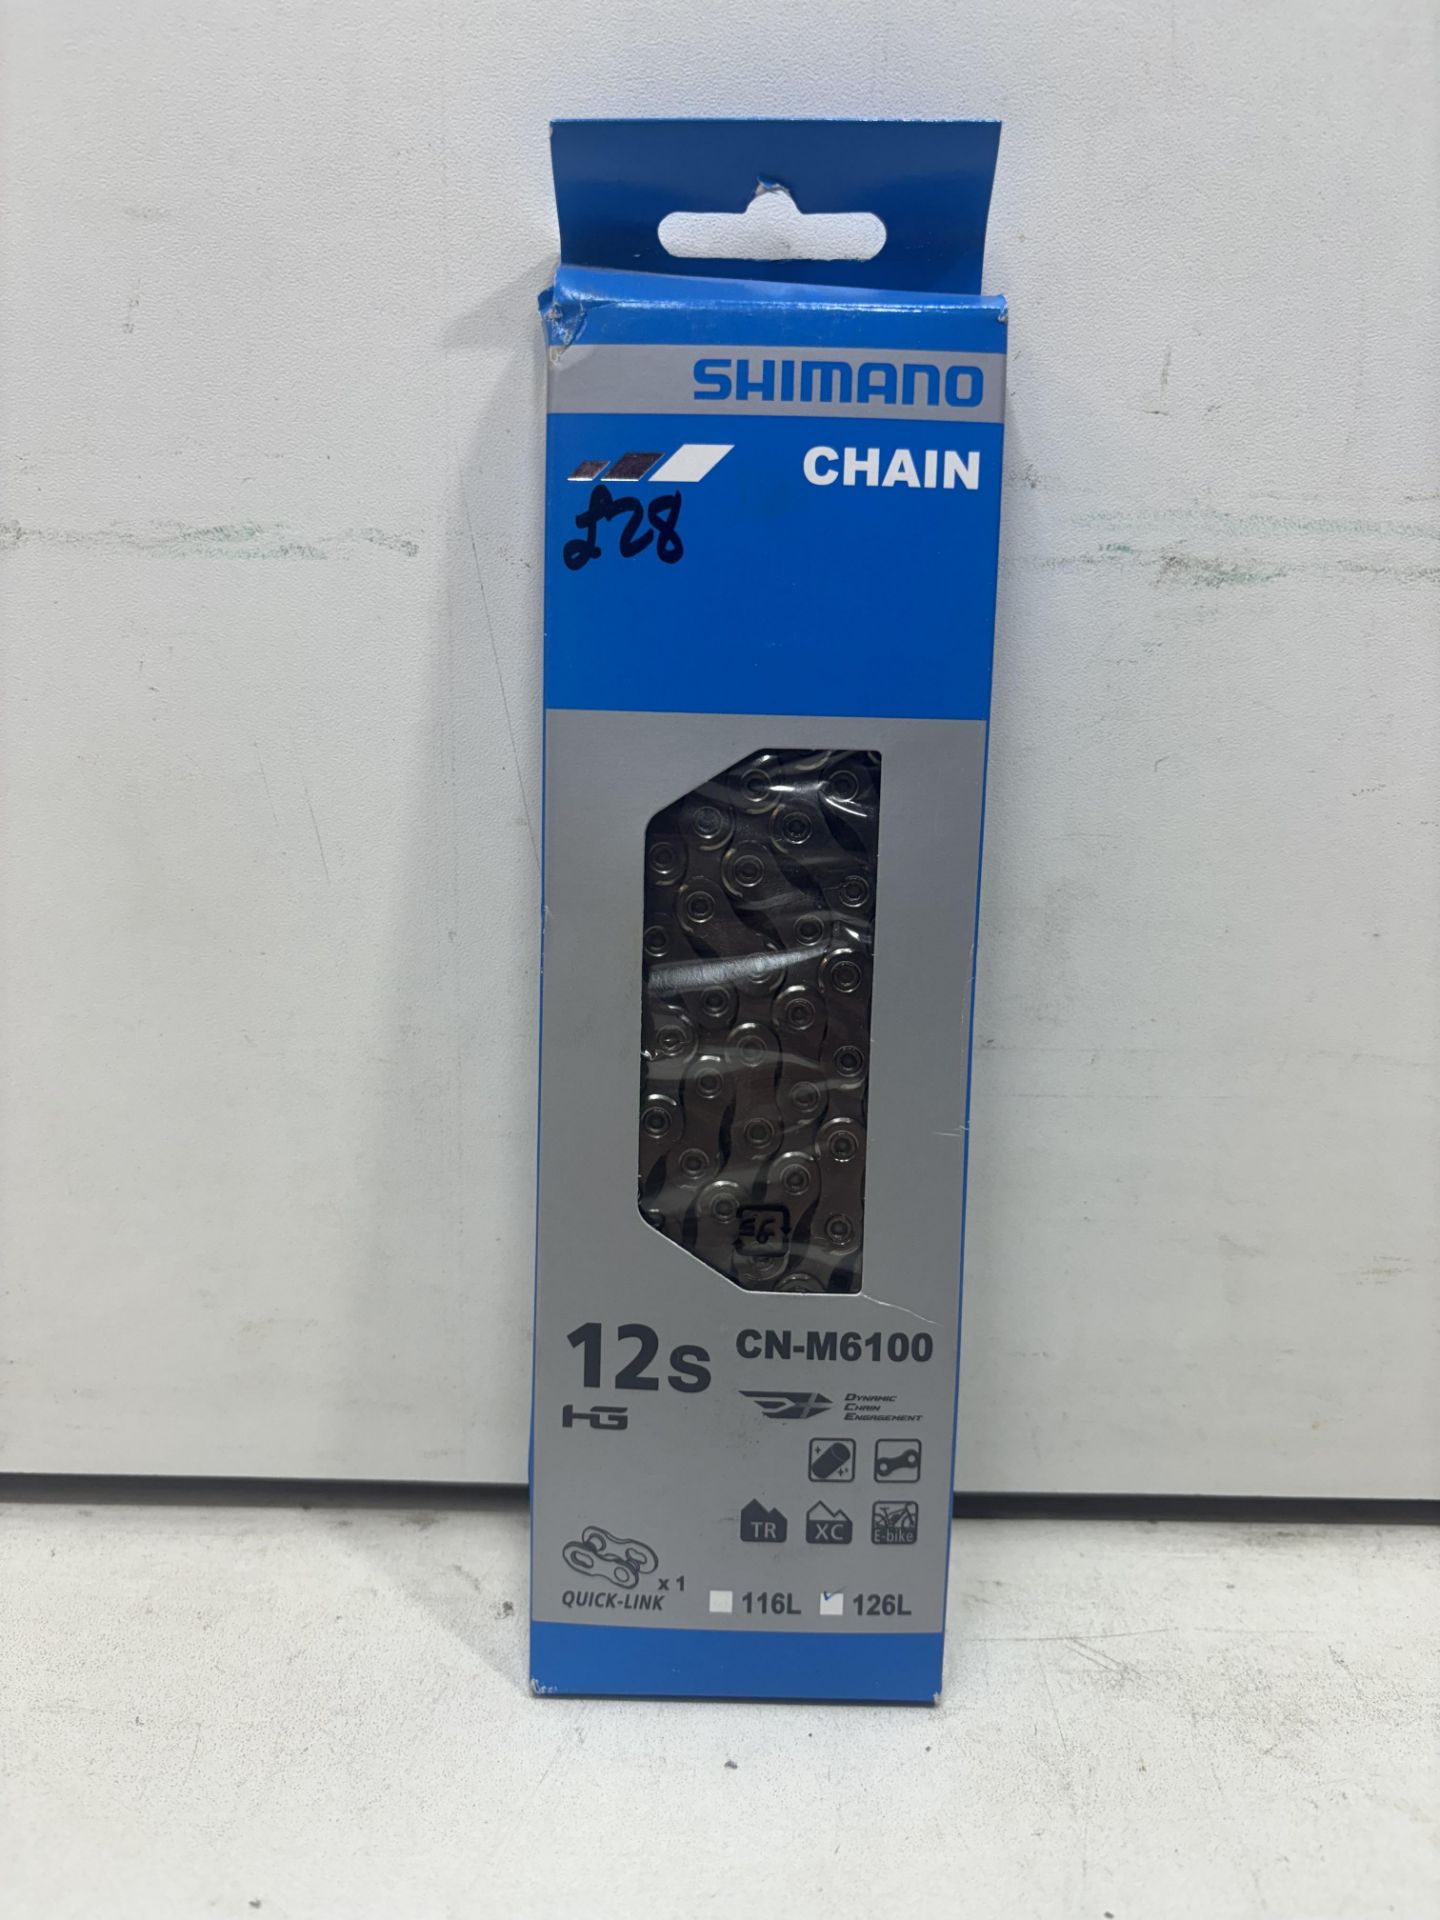 4 x shimano Deore CN-M6100 Chains - 12-Speed, 126 Links - Image 4 of 4